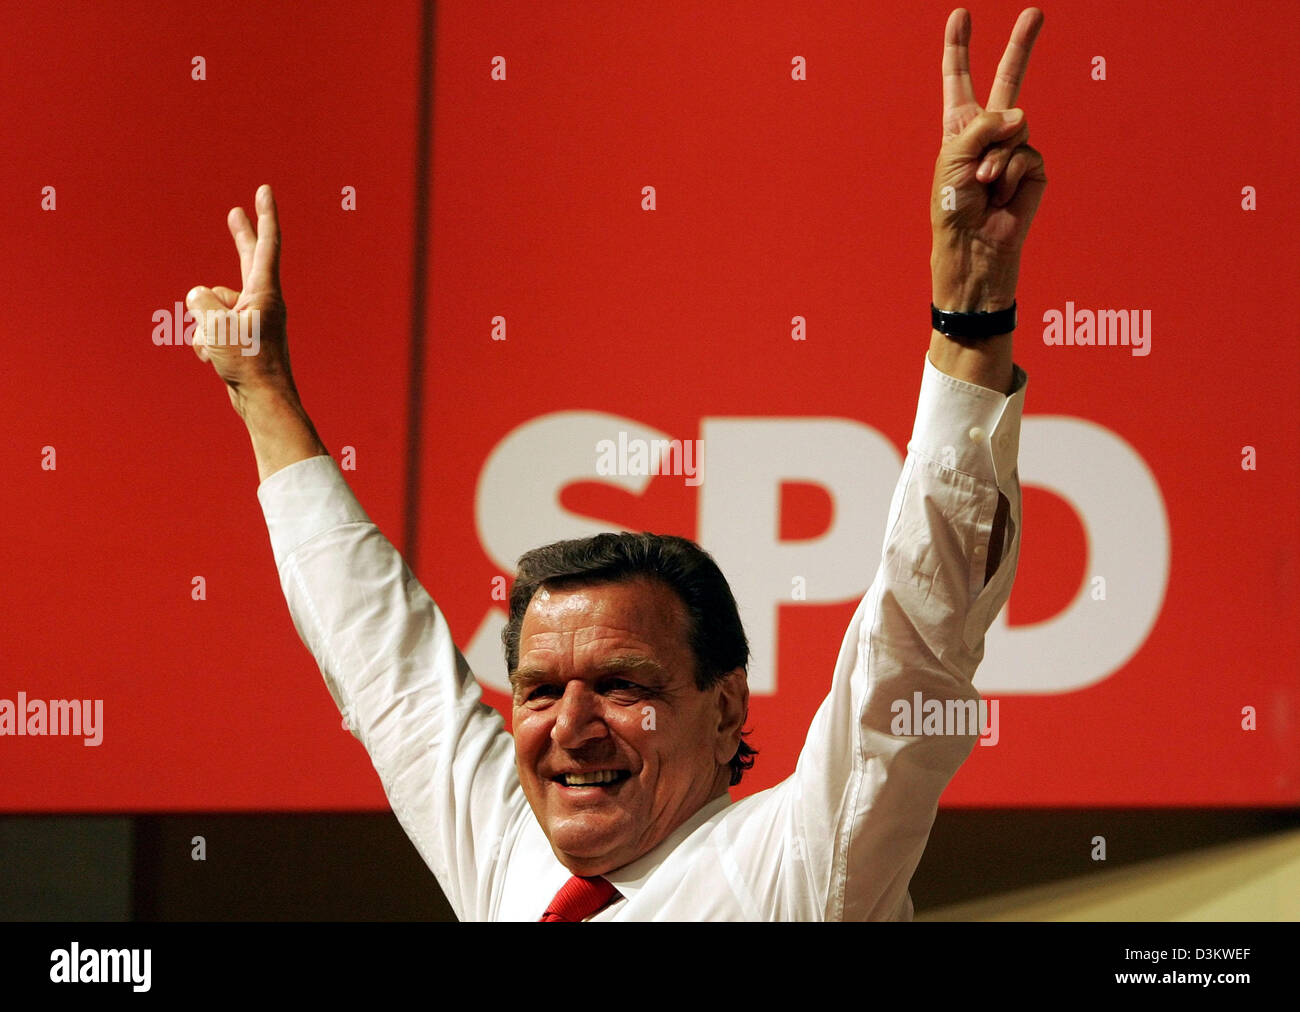 (dpa) - German Chancellor Gerhard Schroeder (SPD) waves to the crowd prior to his speech at an election campaign rally in Hamburg, Germany, 14 September 2005. Germany's elections will be held on September 18, one year ahead of schedule, after the country's highest court ruled the early vote engineered by Schroeder legal. Photo: Michael Dalder Stock Photo